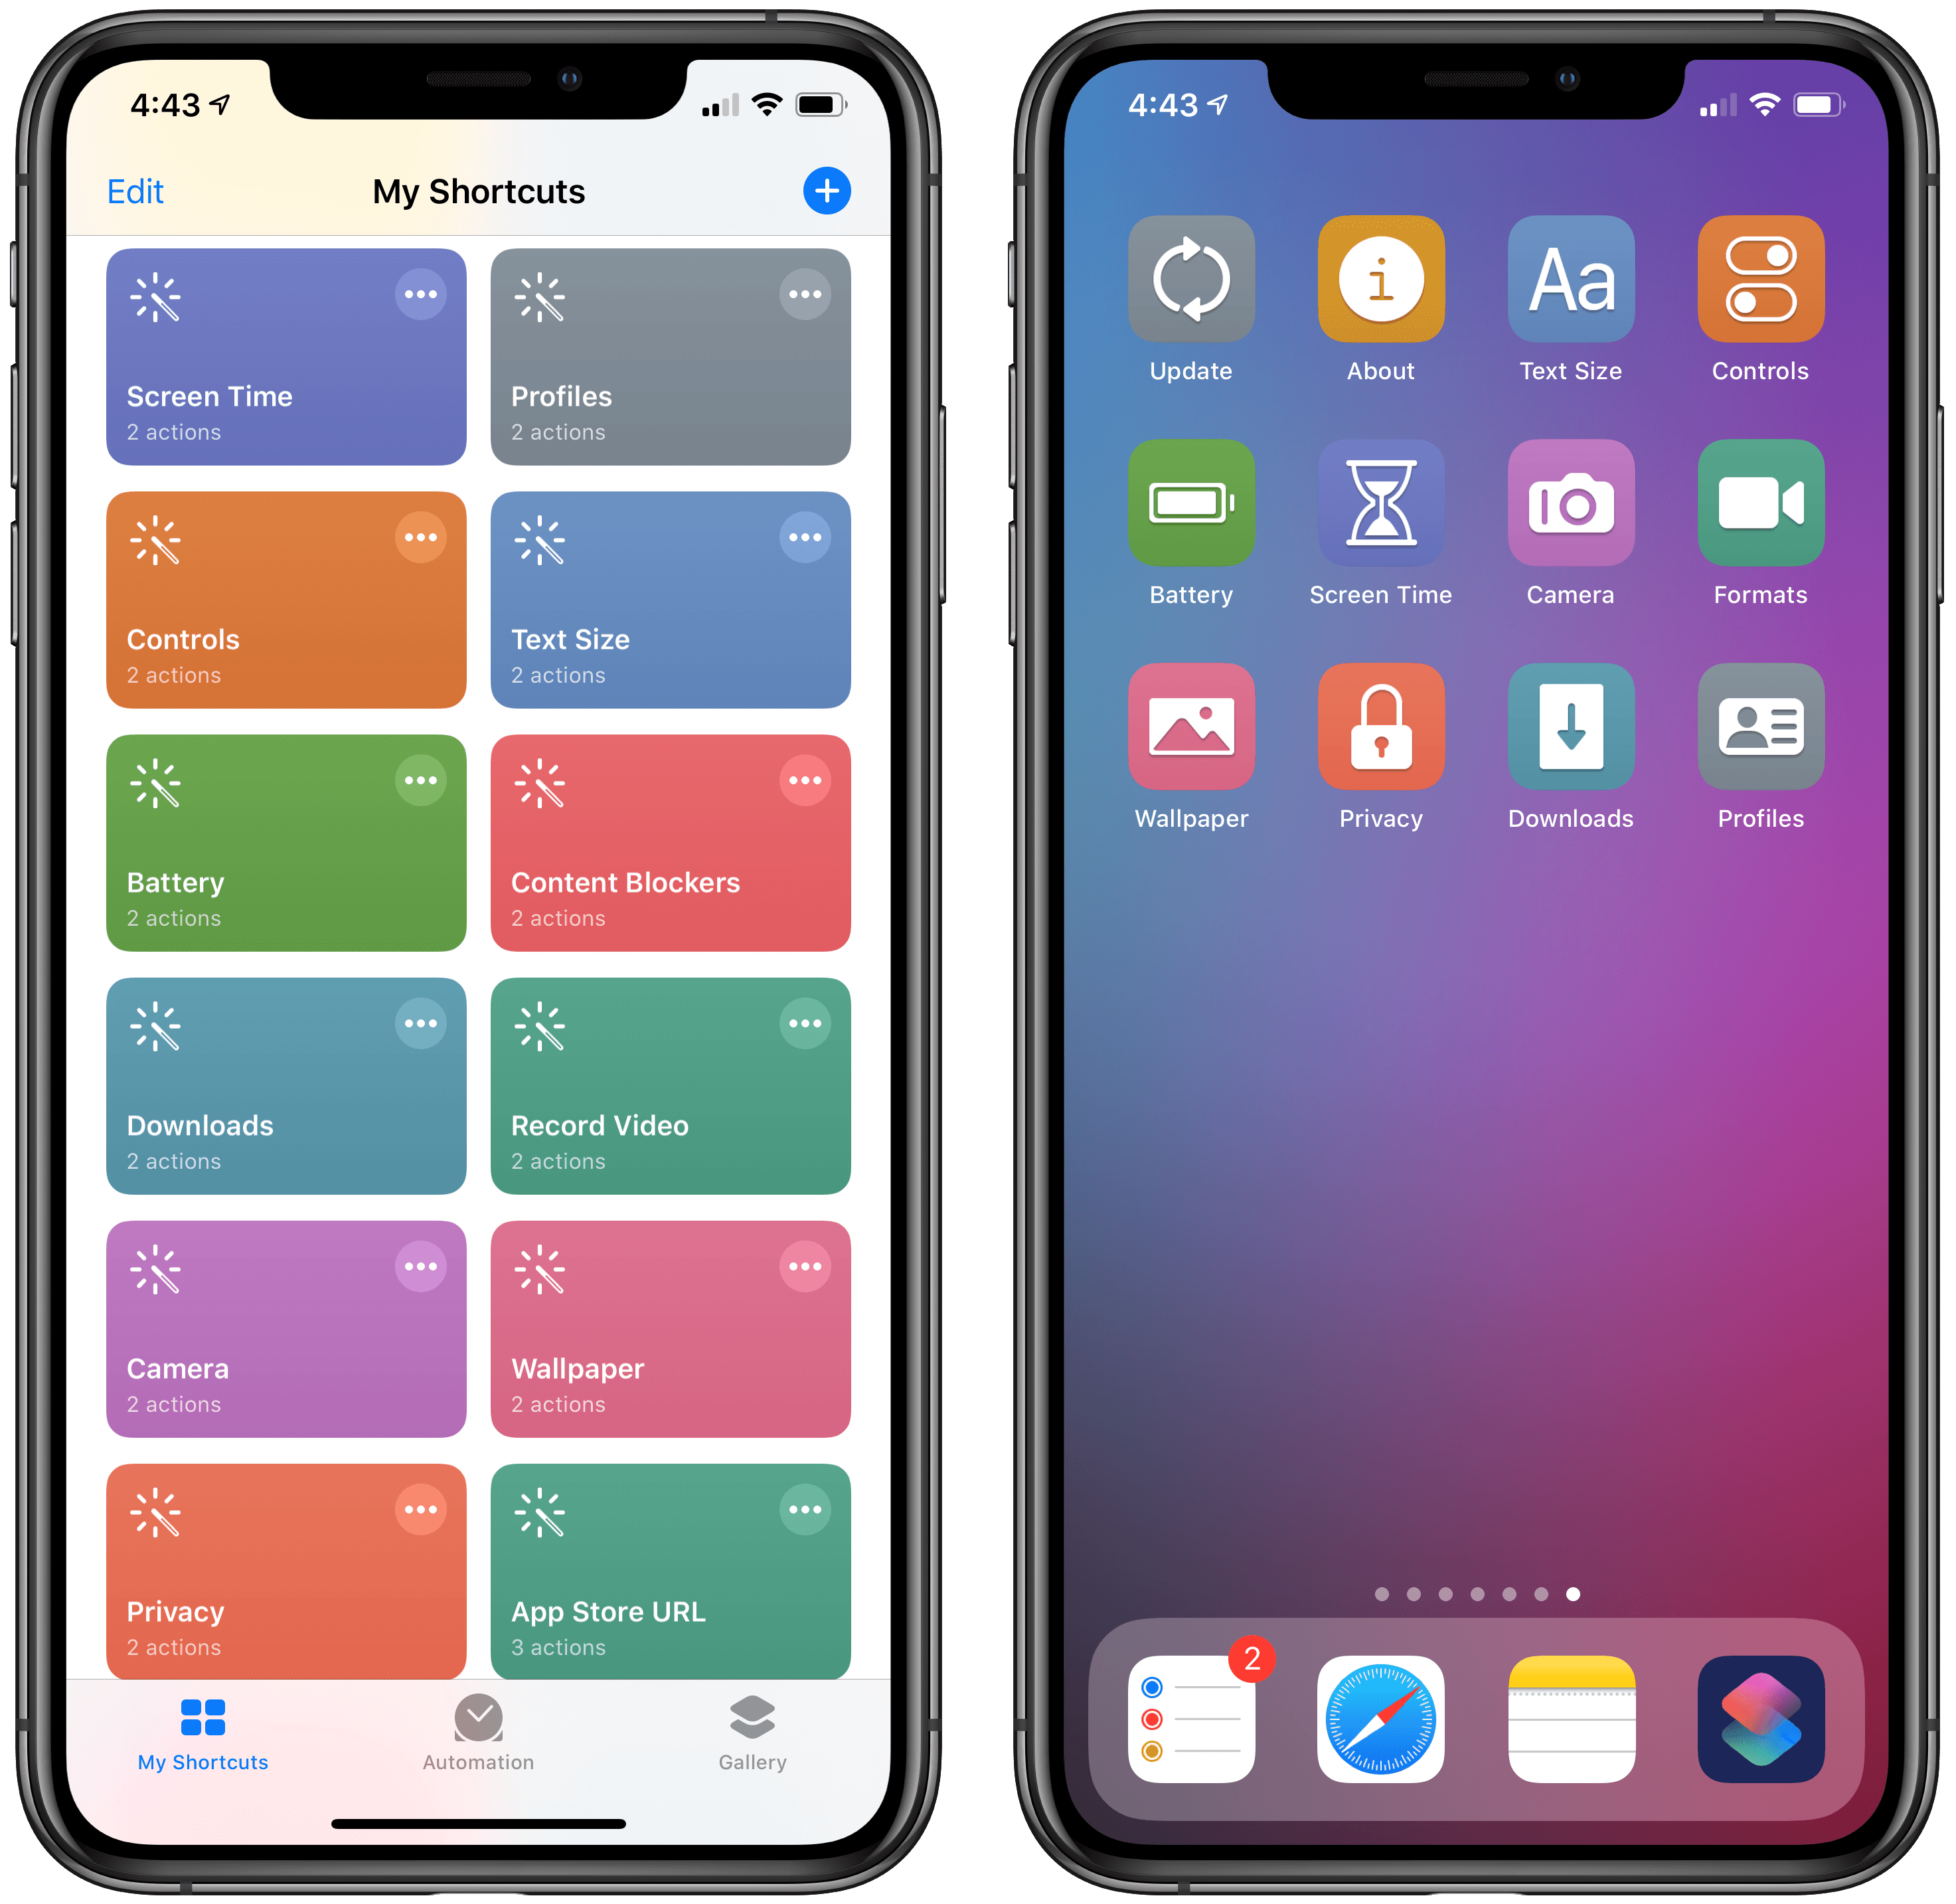 Settings shortcuts on the Home screen (right). The "info" icon will be part of the next free update to MacStories Shortcuts Icons.